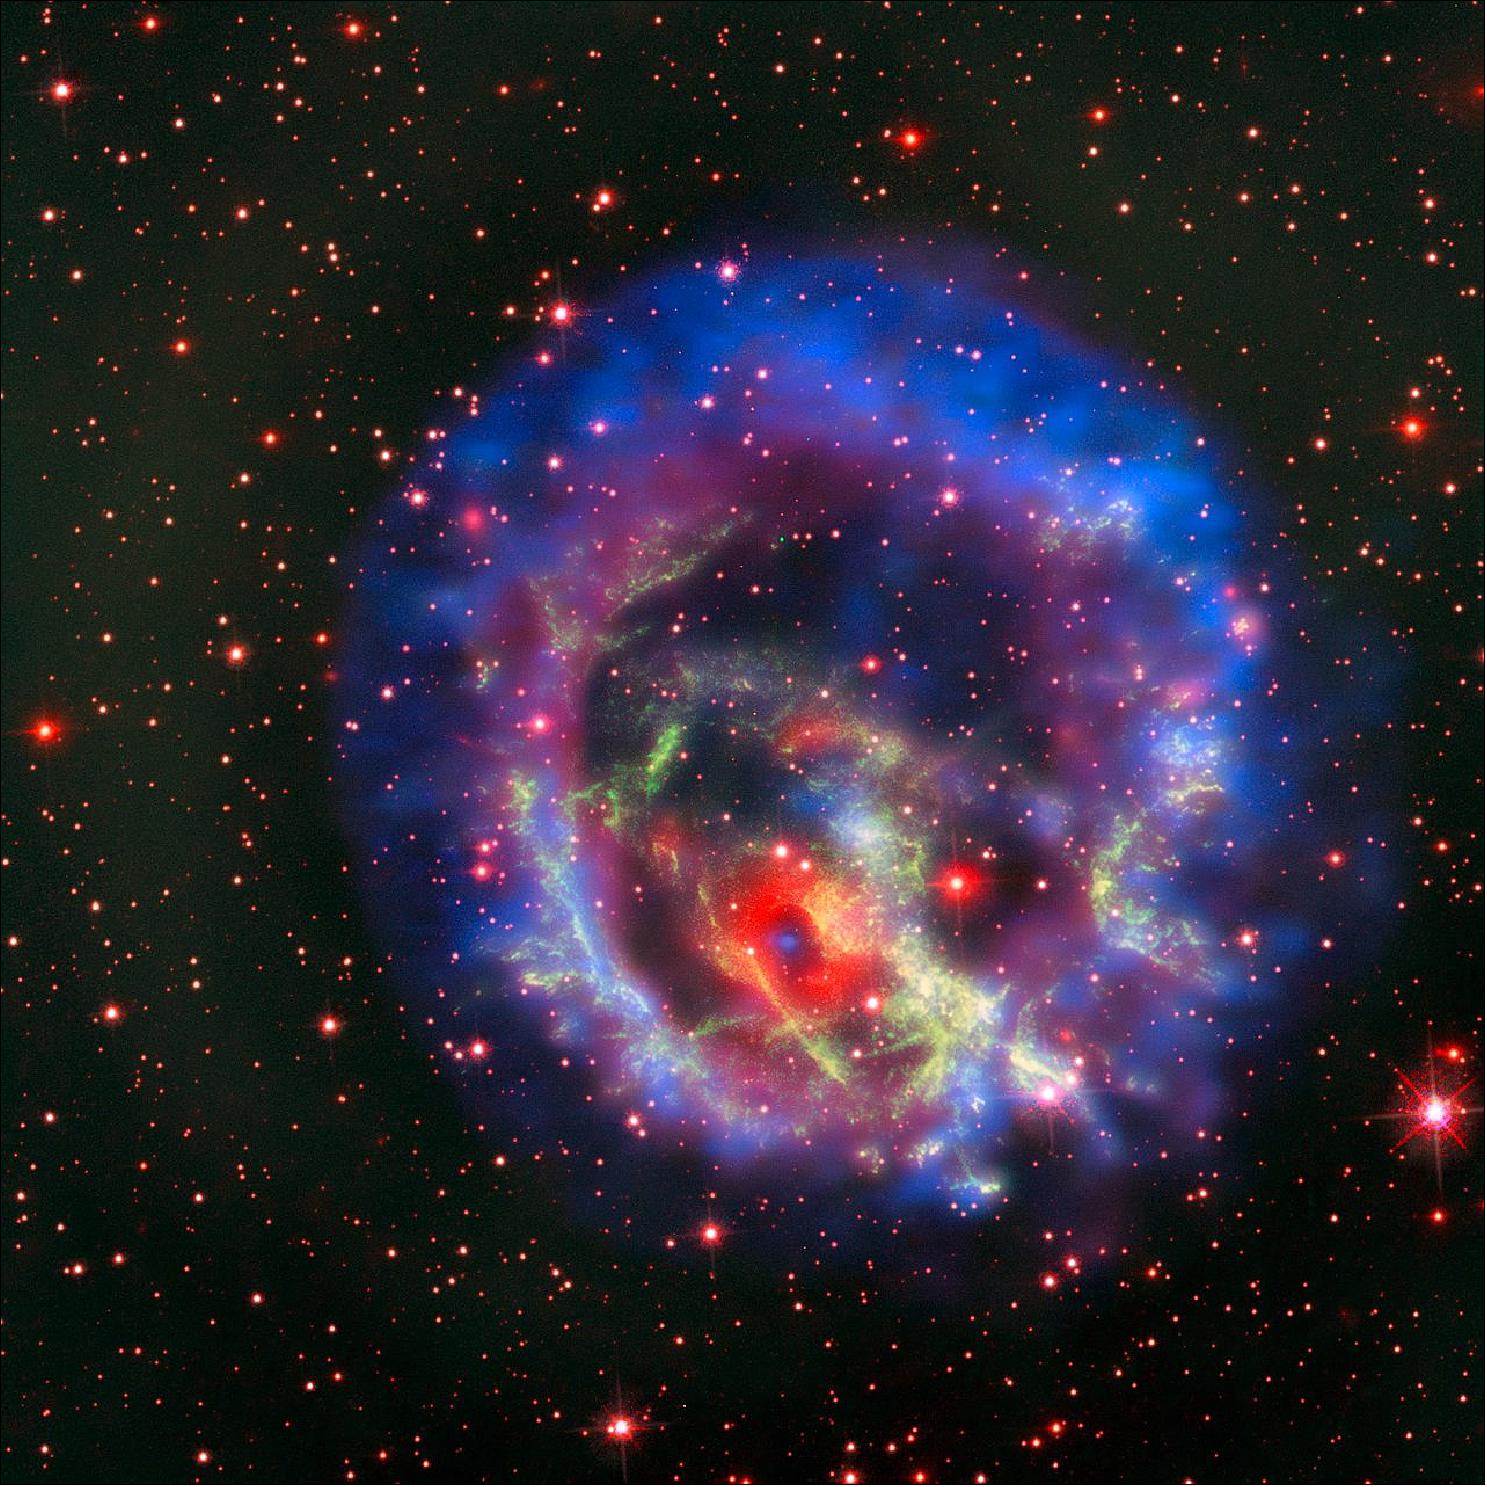 Figure 74: An isolated neutron star in the Small Magellanic Cloud. The image combines data from the MUSE instrument on ESO’s Very Large Telescope in Chile and the orbiting the NASA/ESA Hubble Space Telescope and NASA Chandra X-Ray Observatory (image credit: ESO)